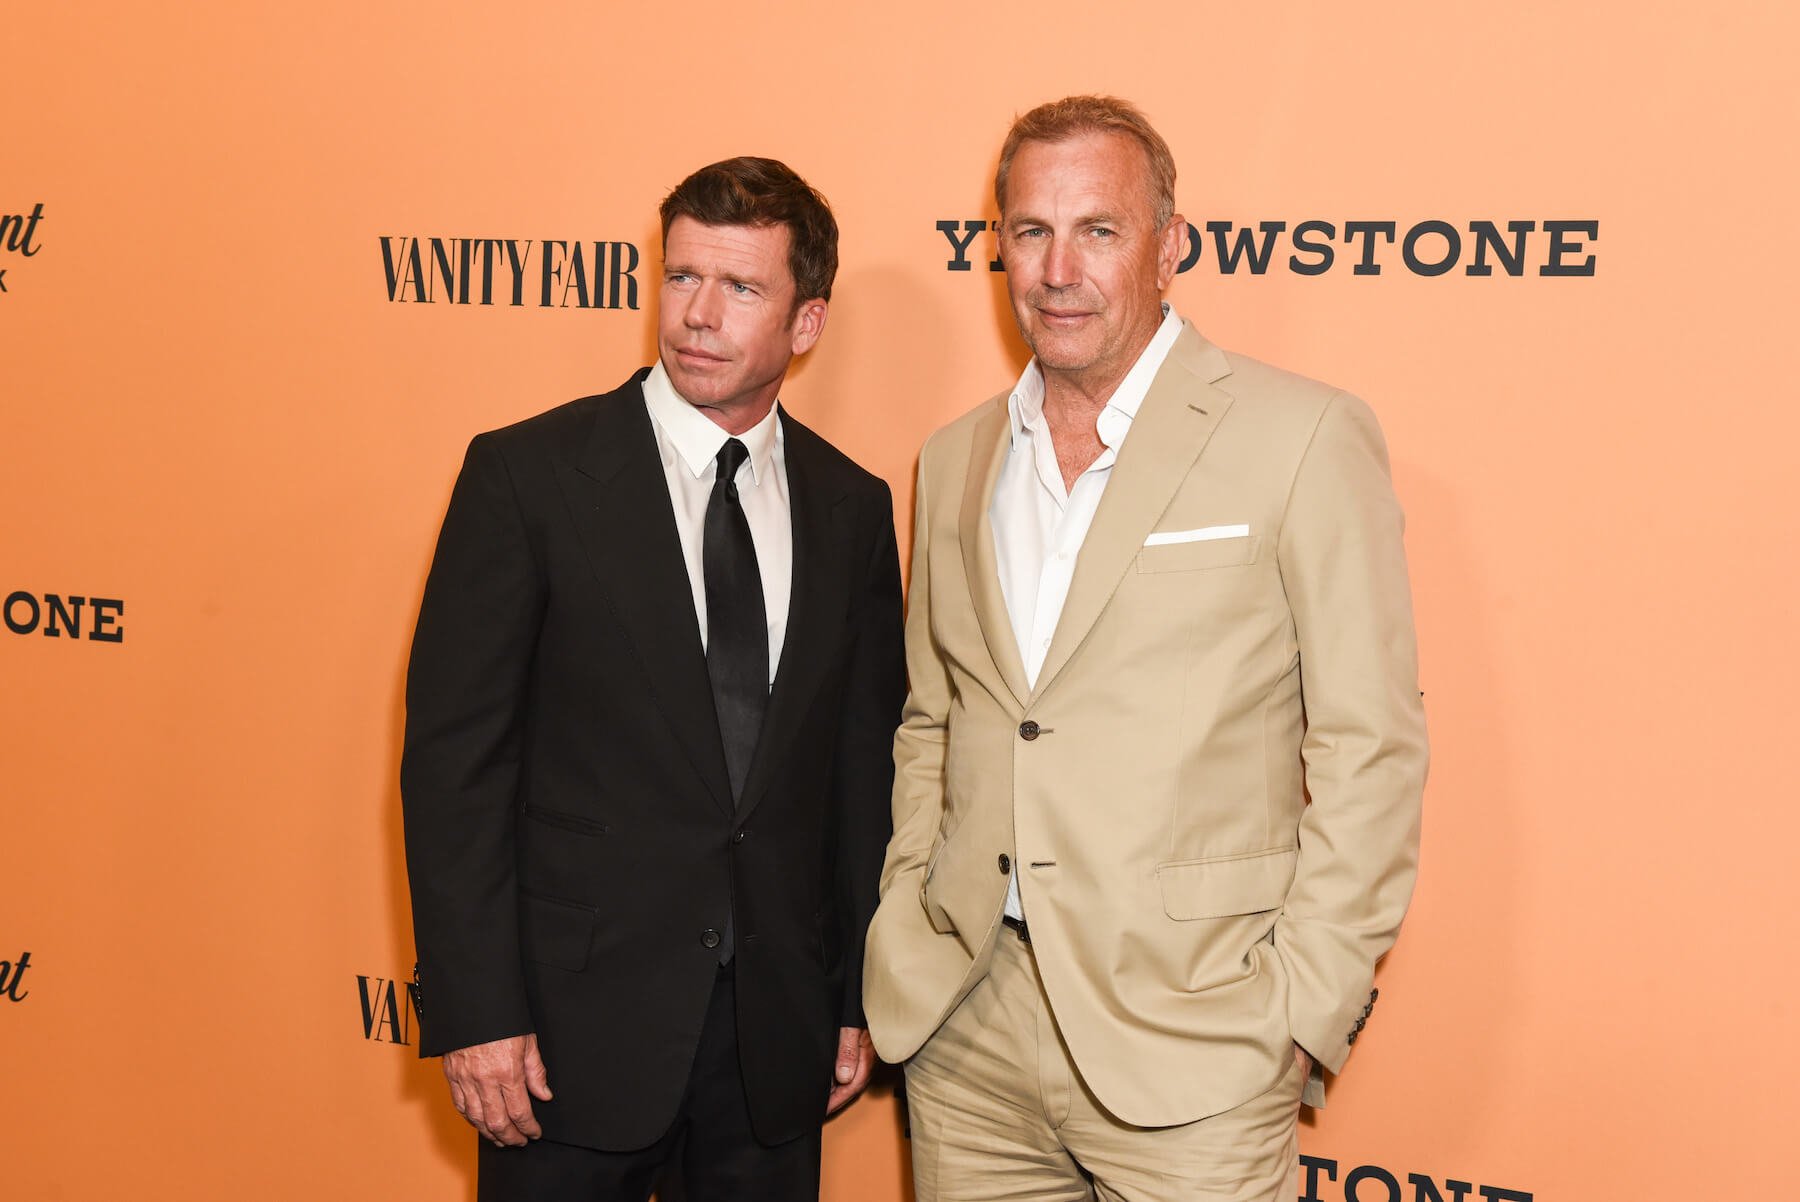 Taylor Sheridan and Kevin Costner from 'Yellowstone' Season 5 standing next to each other against an orange background